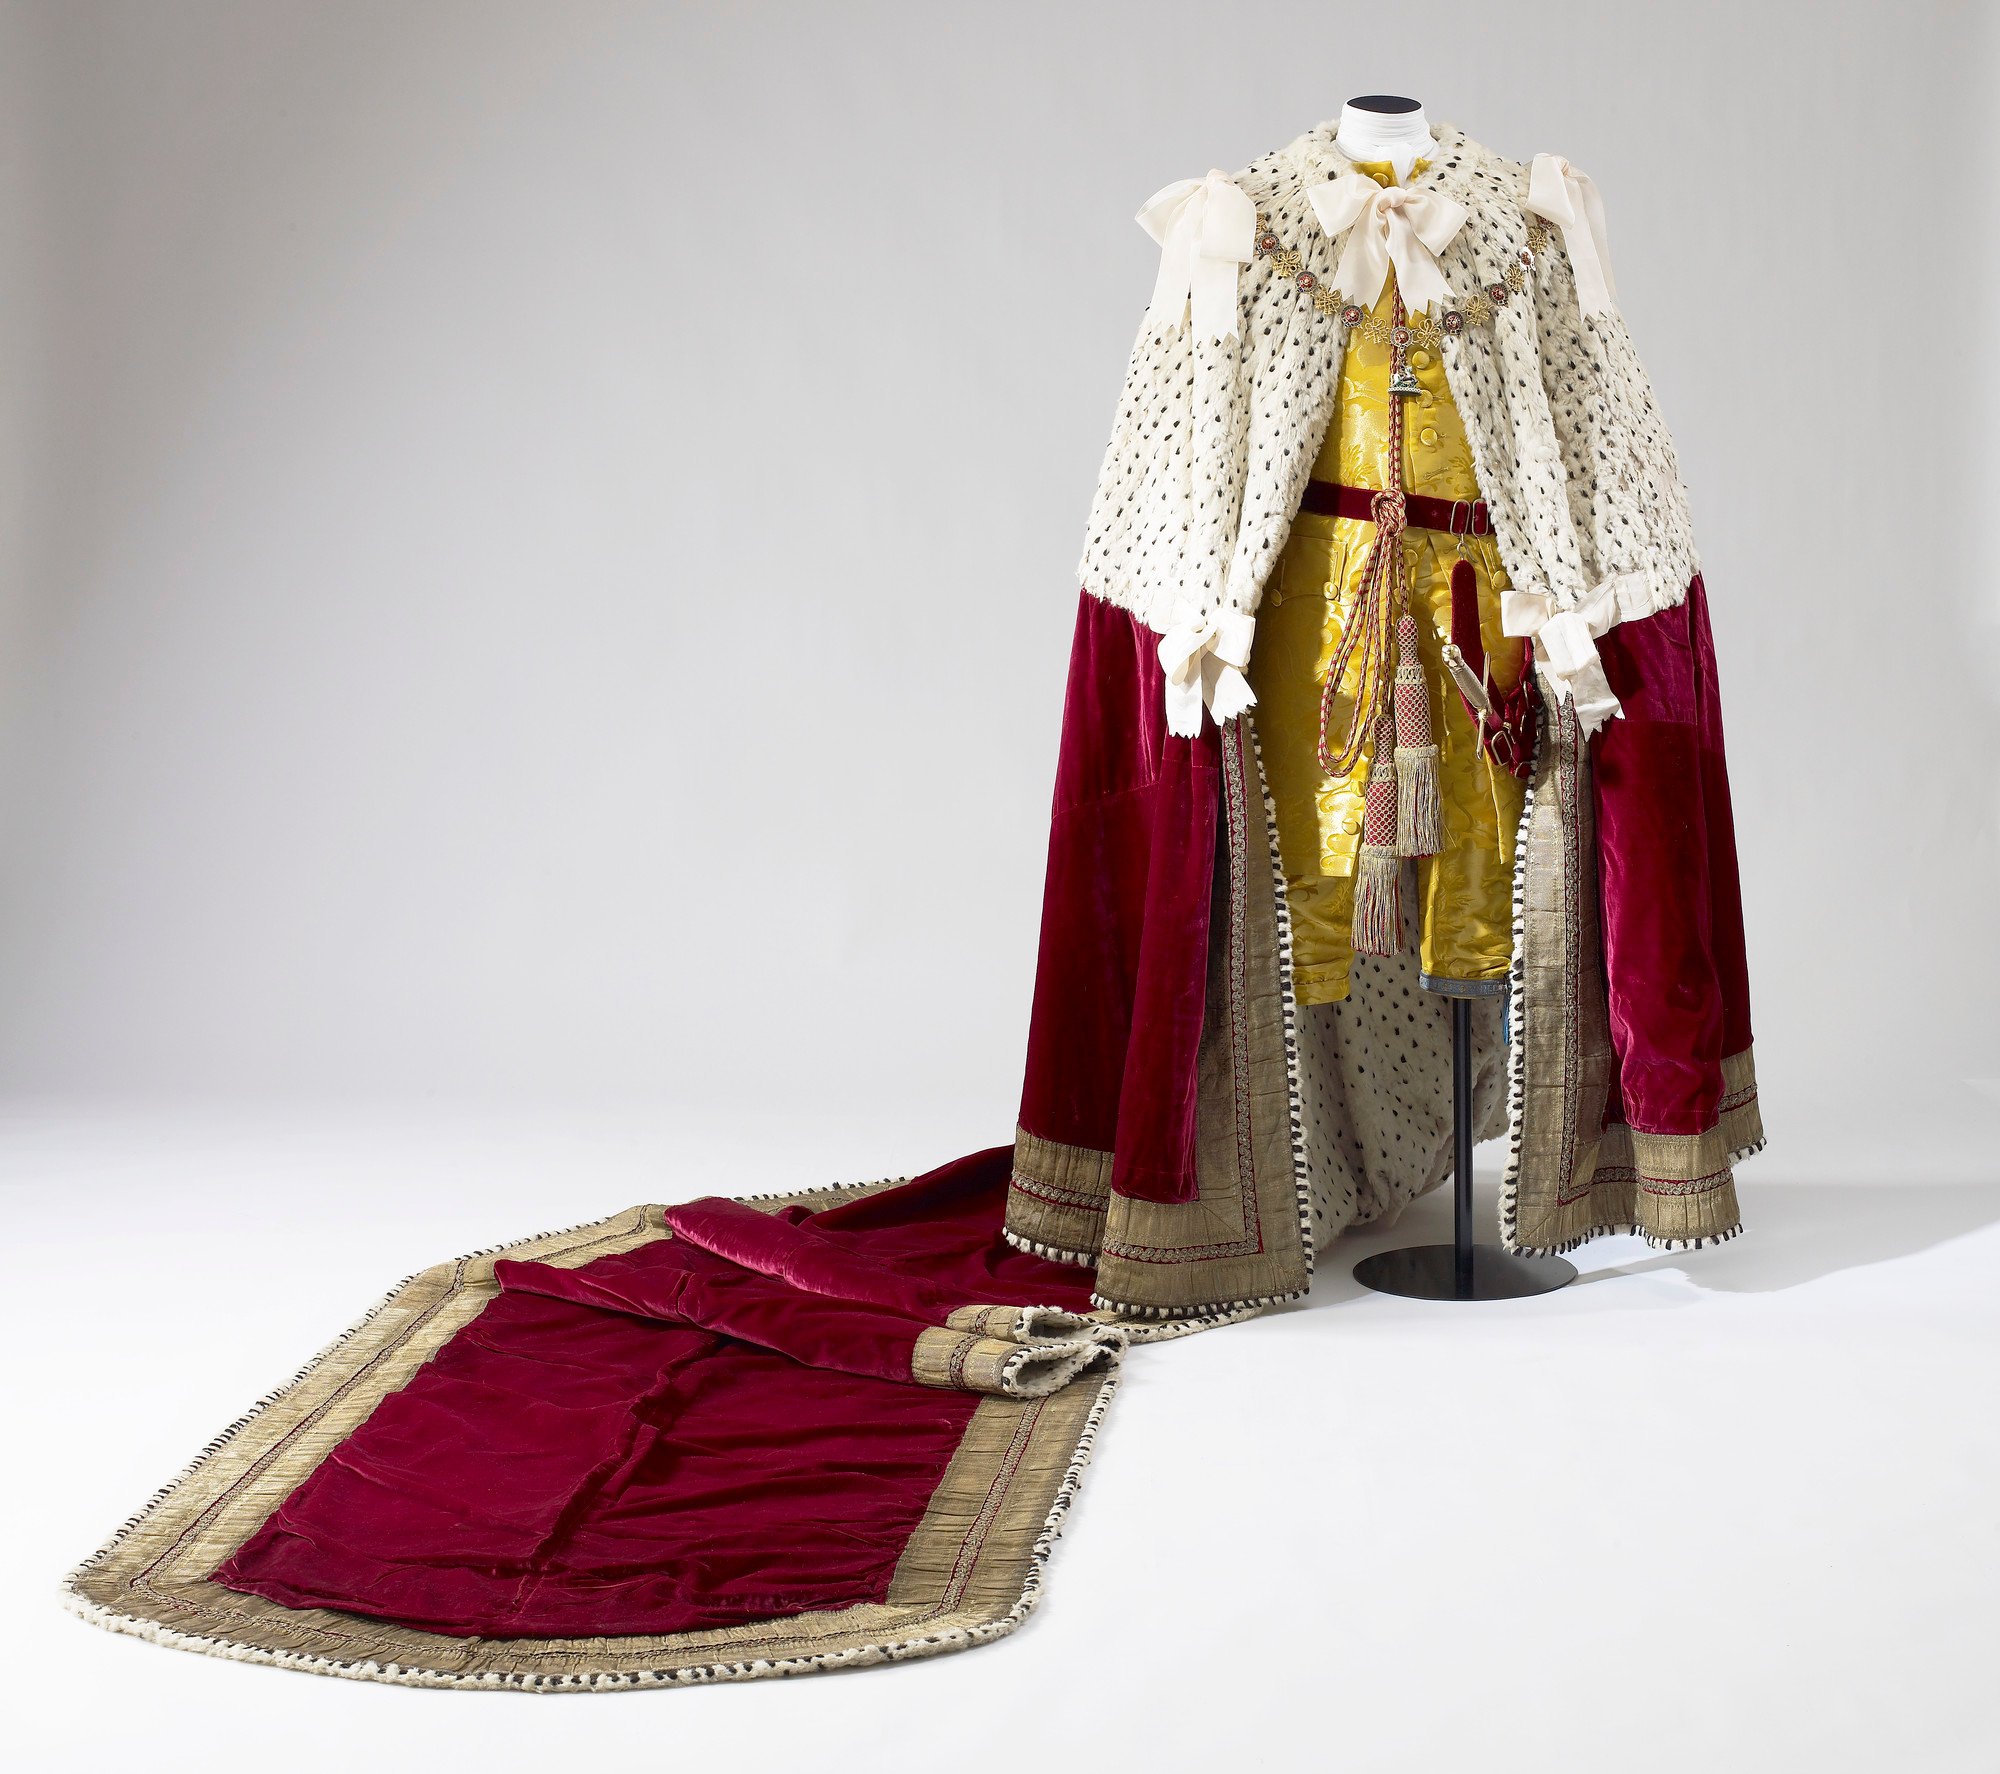 Robe of State